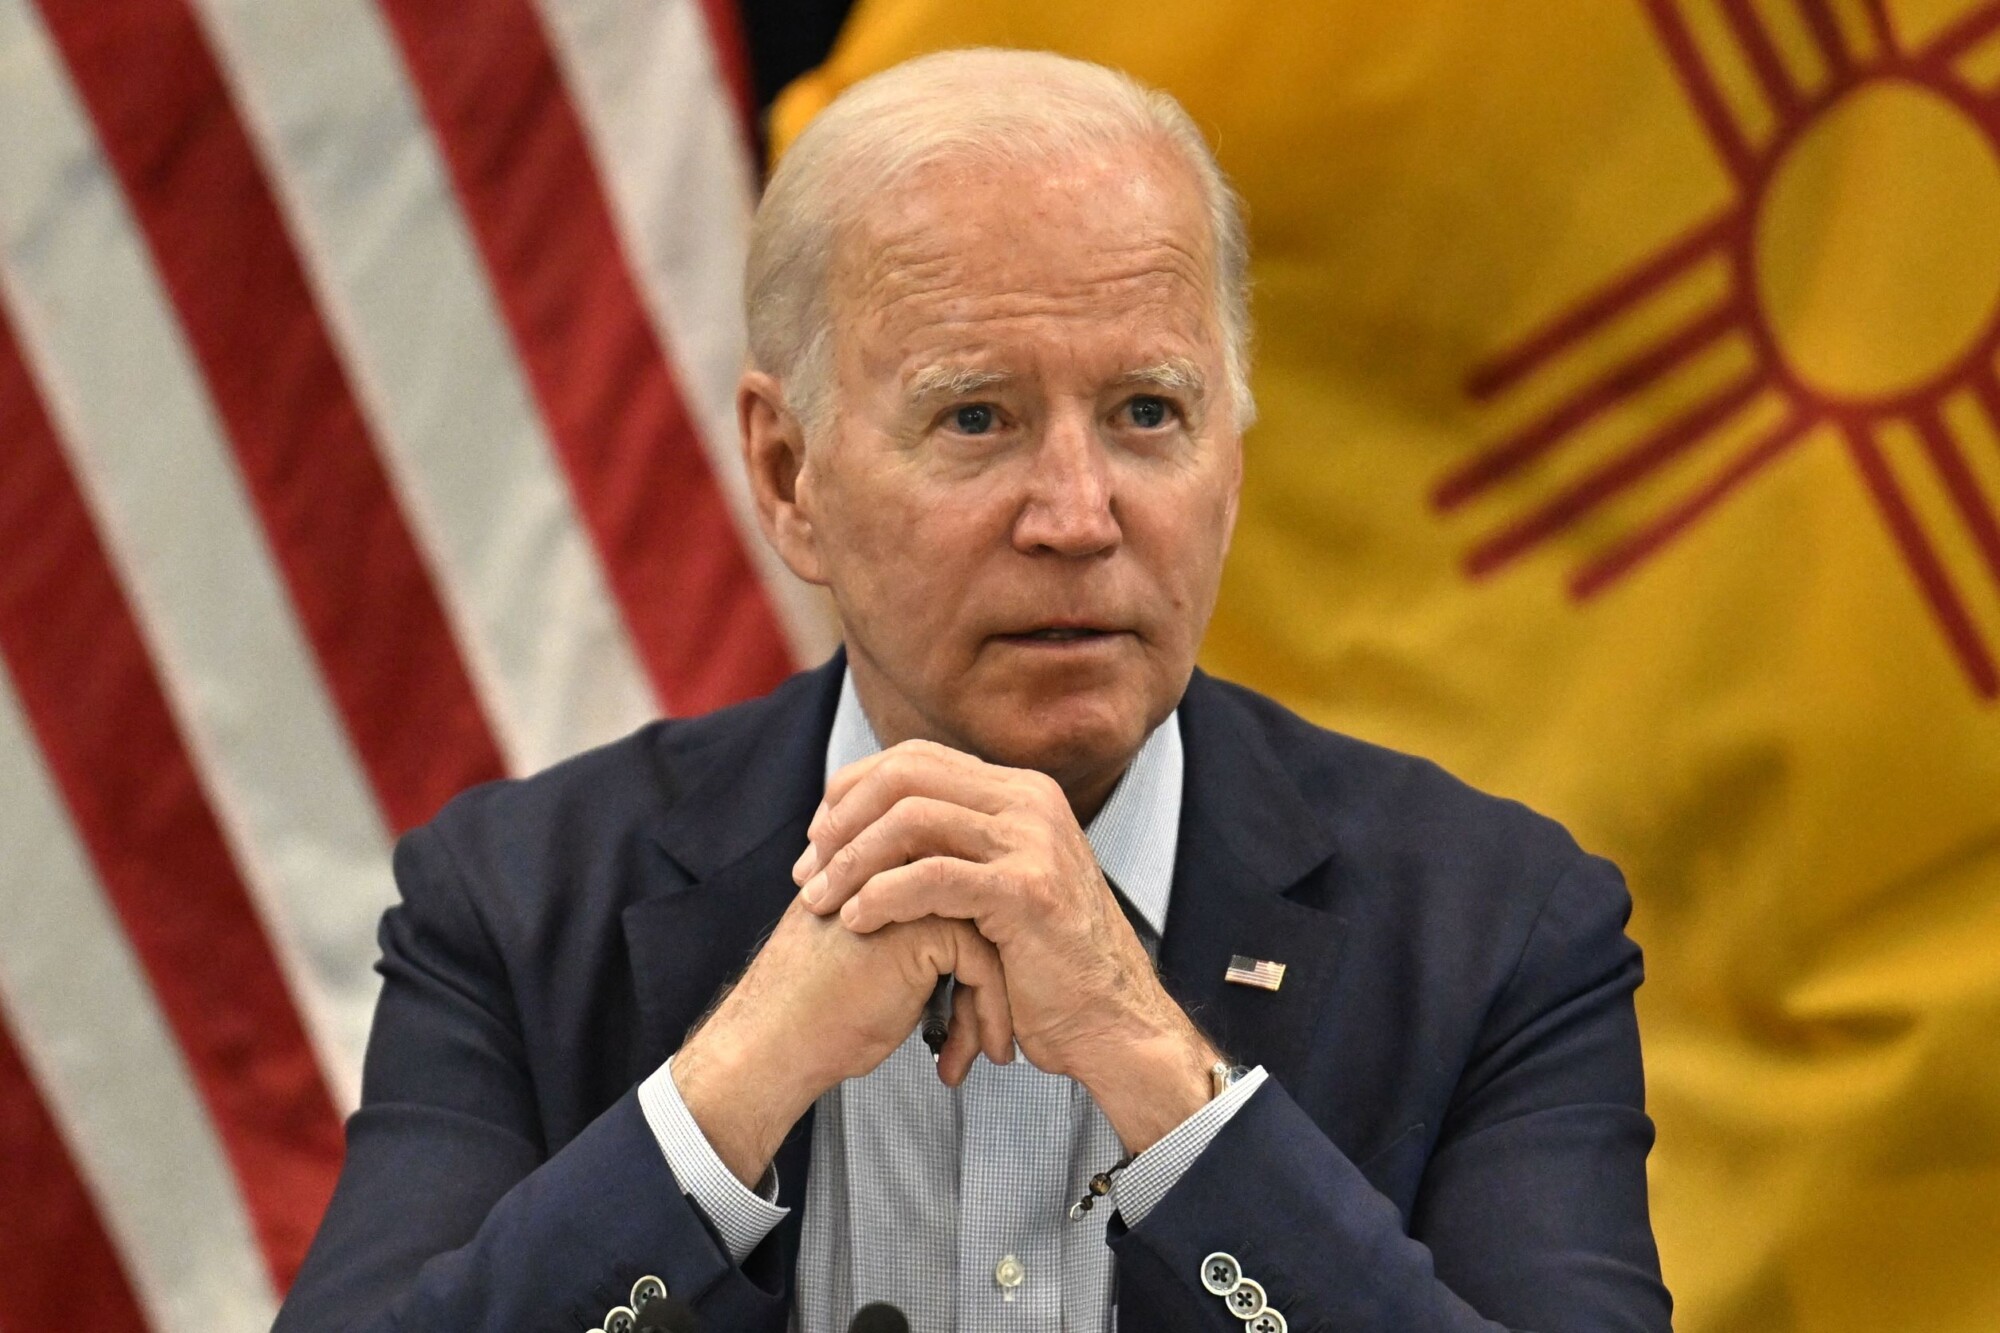 ‘Not a Question We Should Even Be Asking’: White House Responds to Query About Biden’s Health